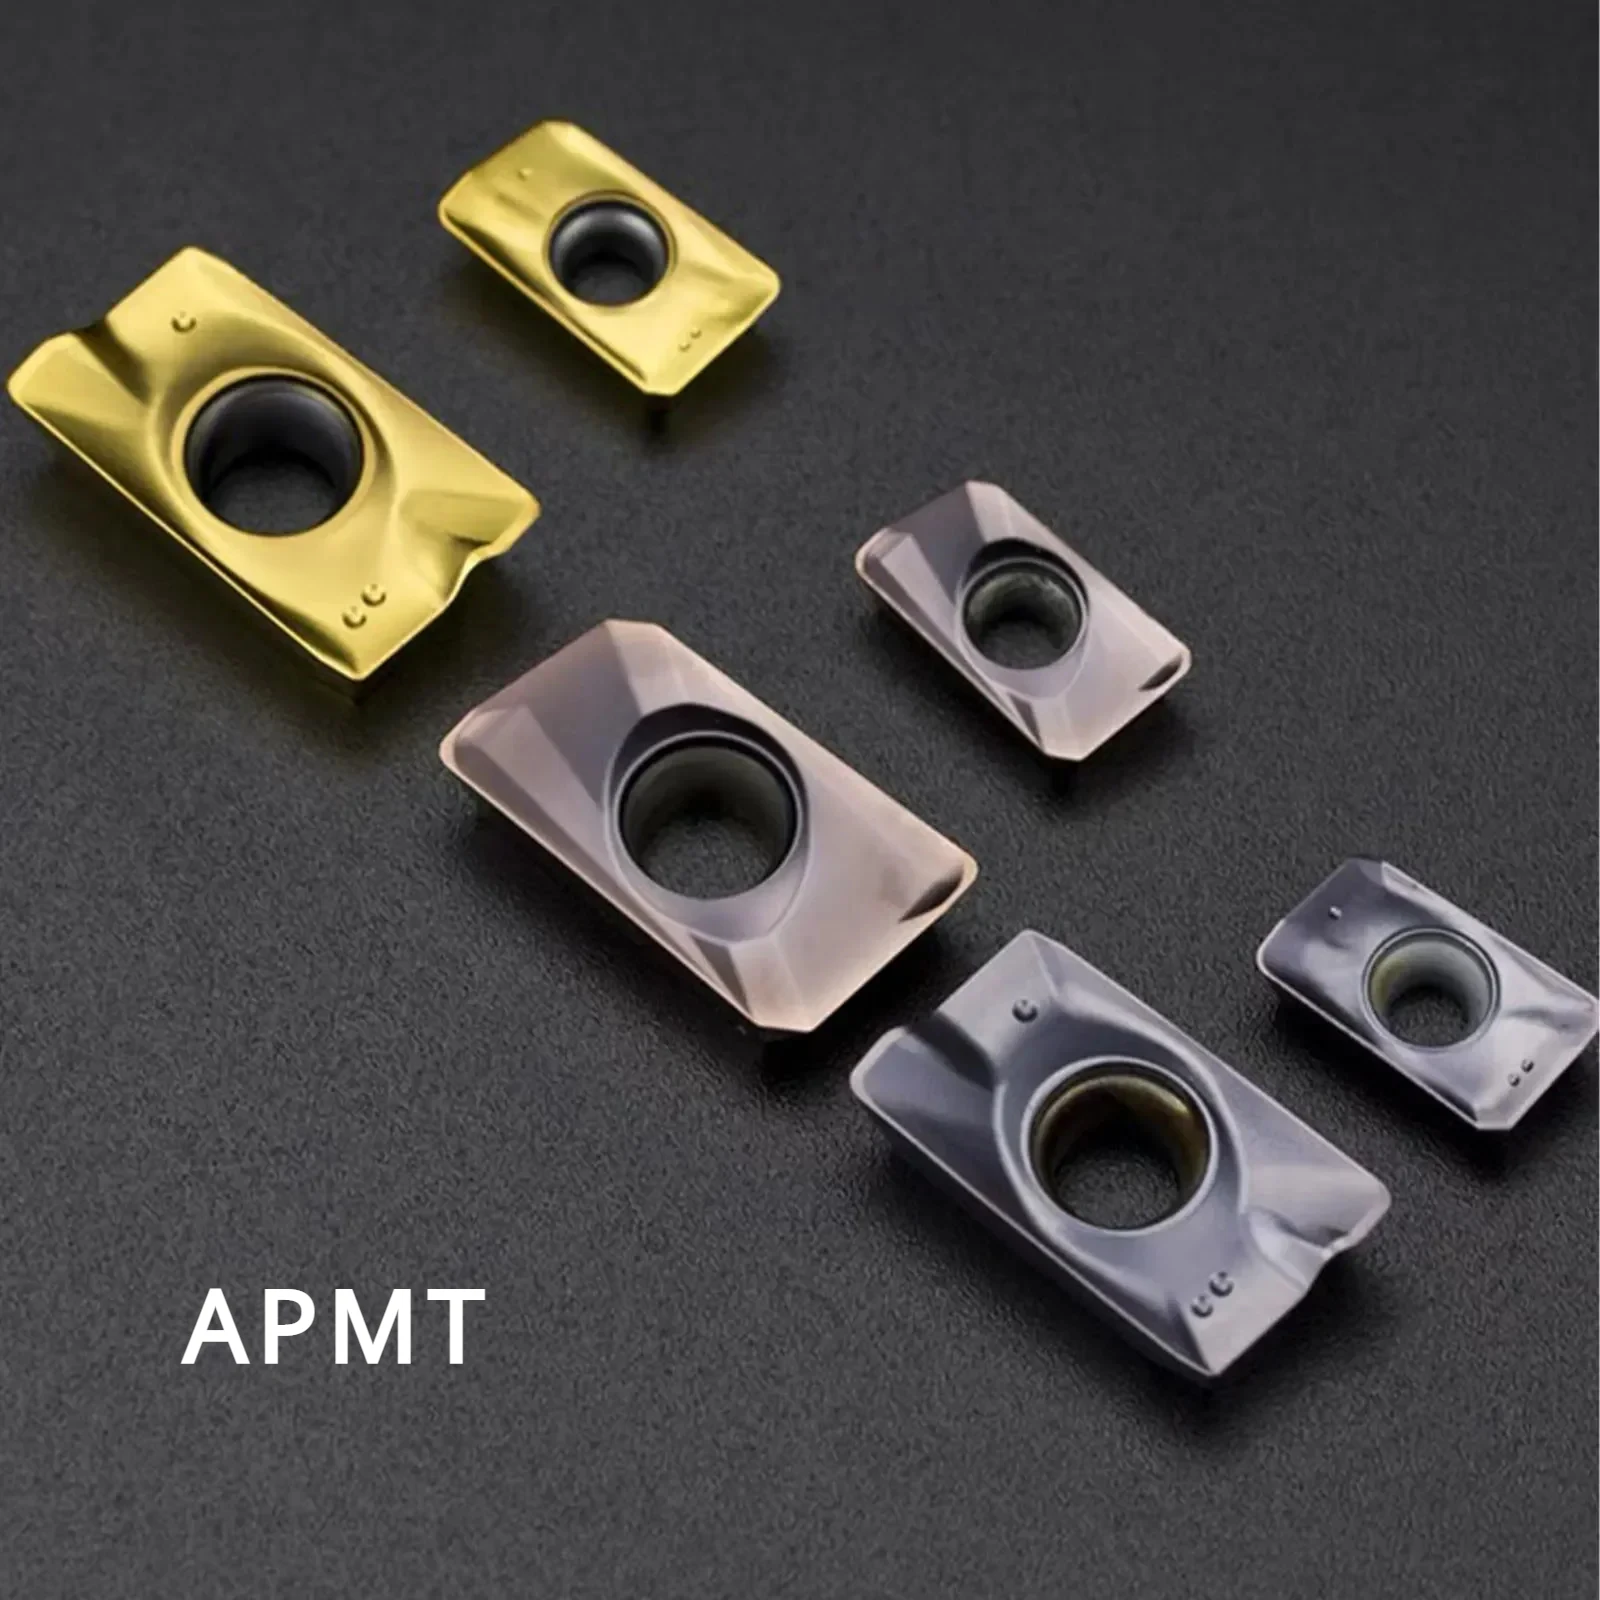 

10pcs APMT Carbide Turning Tool Inserts APMT1135/1604 Cutting Stainless Steel Workpieces R0.8 Coating Rough Milling Lathe